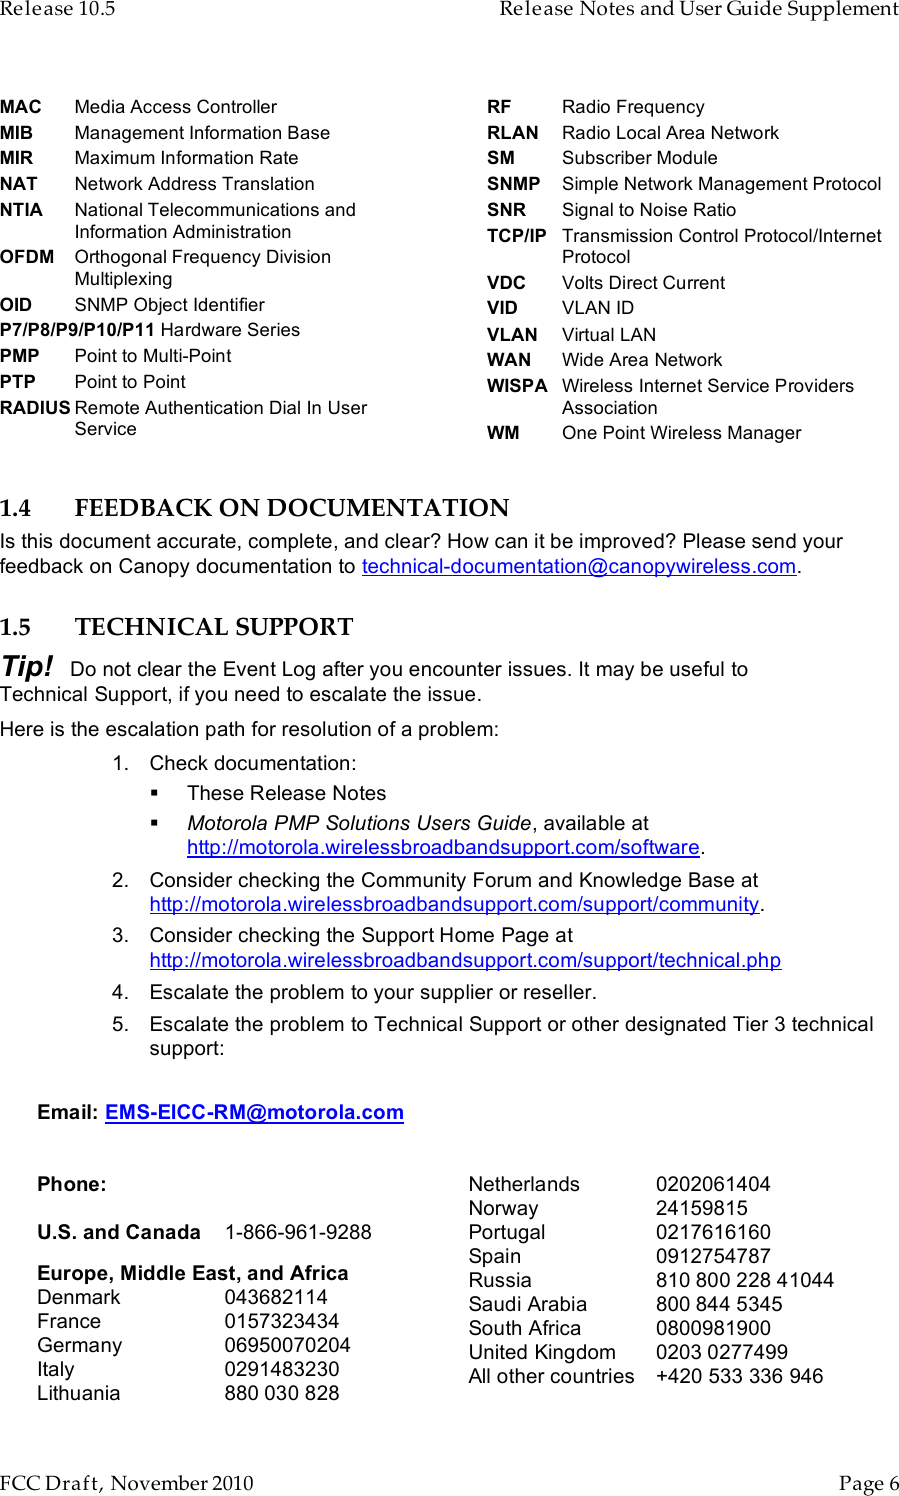 Release 10.5    Release Notes and User Guide Supplement      FCC Draft, November 2010  Page 6   MAC Media Access Controller MIB Management Information Base MIR Maximum Information Rate NAT Network Address Translation NTIA National Telecommunications and Information Administration OFDM Orthogonal Frequency Division Multiplexing OID SNMP Object Identifier P7/P8/P9/P10/P11 Hardware Series PMP Point to Multi-Point PTP Point to Point RADIUS Remote Authentication Dial In User Service RF Radio Frequency RLAN Radio Local Area Network SM Subscriber Module SNMP Simple Network Management Protocol SNR Signal to Noise Ratio TCP/IP Transmission Control Protocol/Internet Protocol VDC Volts Direct Current VID VLAN ID VLAN Virtual LAN WAN Wide Area Network WISPA Wireless Internet Service Providers Association WM One Point Wireless Manager1.4 FEEDBACK ON DOCUMENTATION Is this document accurate, complete, and clear? How can it be improved? Please send your feedback on Canopy documentation to technical-documentation@canopywireless.com. 1.5 TECHNICAL SUPPORT Tip!   Do not clear the Event Log after you encounter issues. It may be useful to Technical Support, if you need to escalate the issue. Here is the escalation path for resolution of a problem: 1. Check documentation:  These Release Notes  Motorola PMP Solutions Users Guide, available at http://motorola.wirelessbroadbandsupport.com/software. 2. Consider checking the Community Forum and Knowledge Base at http://motorola.wirelessbroadbandsupport.com/support/community. 3. Consider checking the Support Home Page at http://motorola.wirelessbroadbandsupport.com/support/technical.php  4. Escalate the problem to your supplier or reseller. 5. Escalate the problem to Technical Support or other designated Tier 3 technical support:  Email: EMS-EICC-RM@motorola.com   Phone:  U.S. and Canada 1-866-961-9288 Europe, Middle East, and Africa Denmark  043682114 France 0157323434 Germany 06950070204 Italy 0291483230 Lithuania 880 030 828 Netherlands 0202061404 Norway 24159815 Portugal 0217616160 Spain 0912754787 Russia 810 800 228 41044 Saudi Arabia 800 844 5345 South Africa 0800981900 United Kingdom 0203 0277499 All other countries +420 533 336 946 